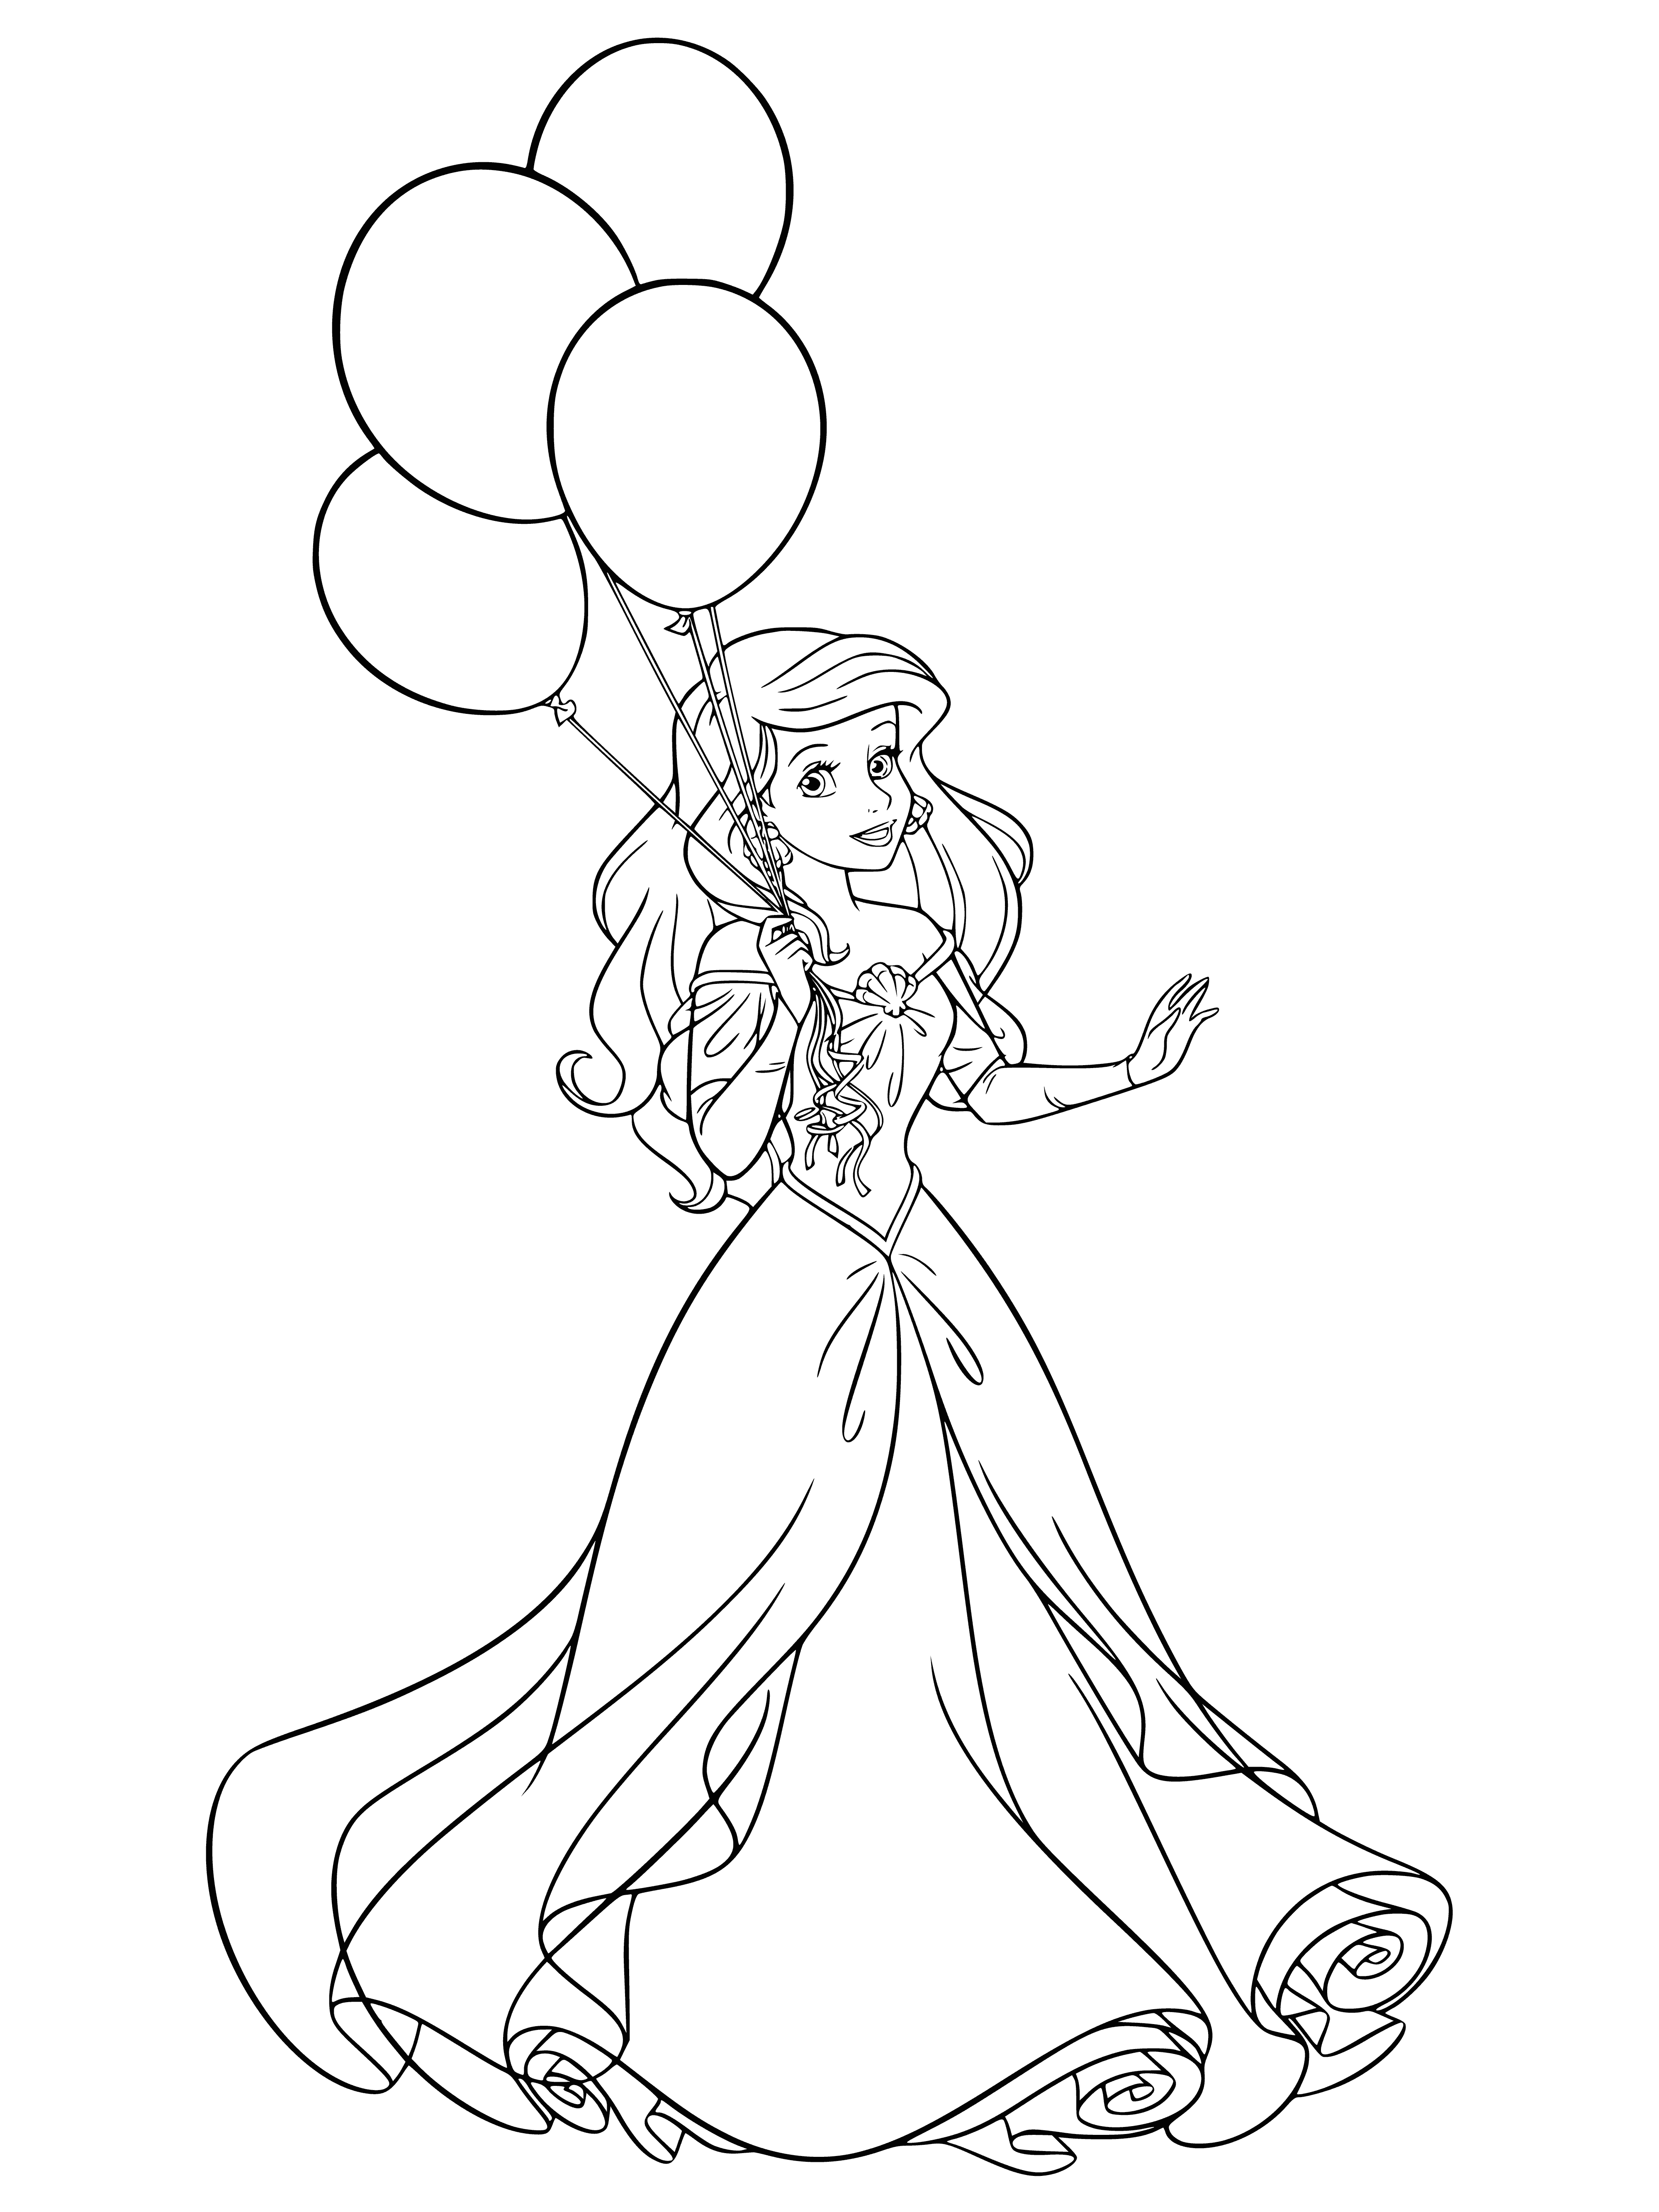 Mermaid with balloons coloring page